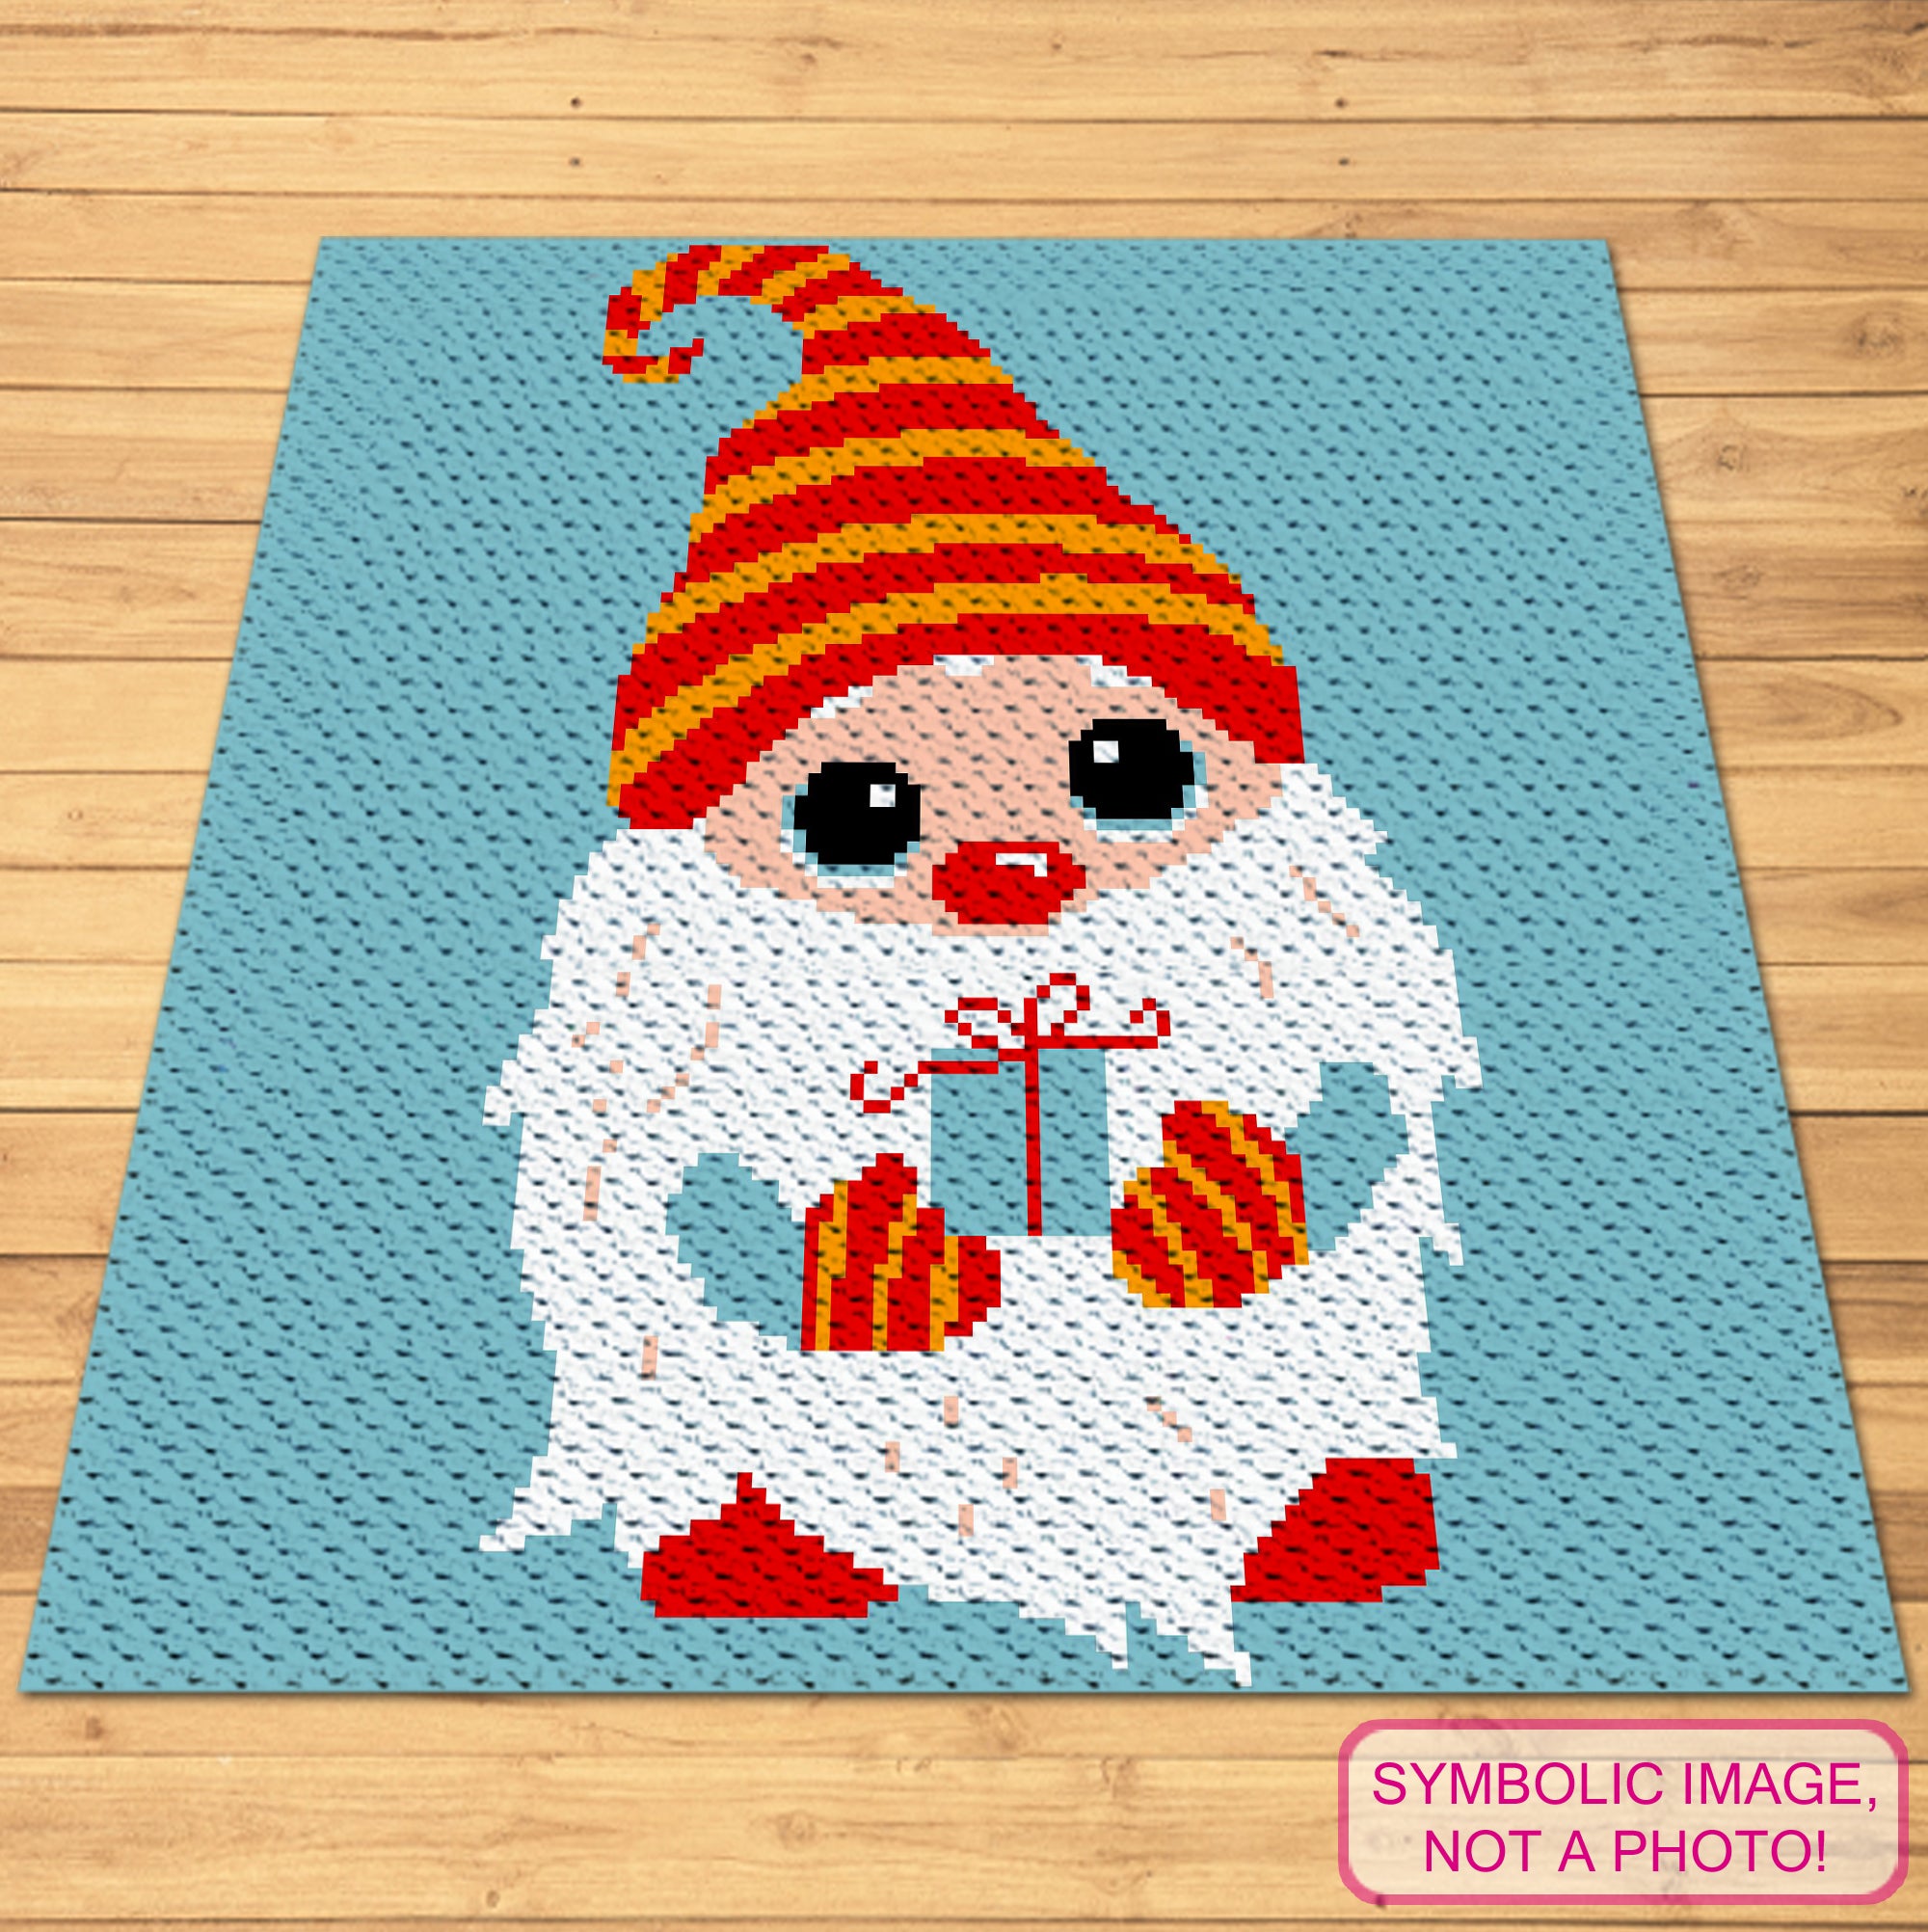 C2C Crochet Gnome Pattern - Christmas crochet Blanket Pattern with Written Instructions. Click to learn more!